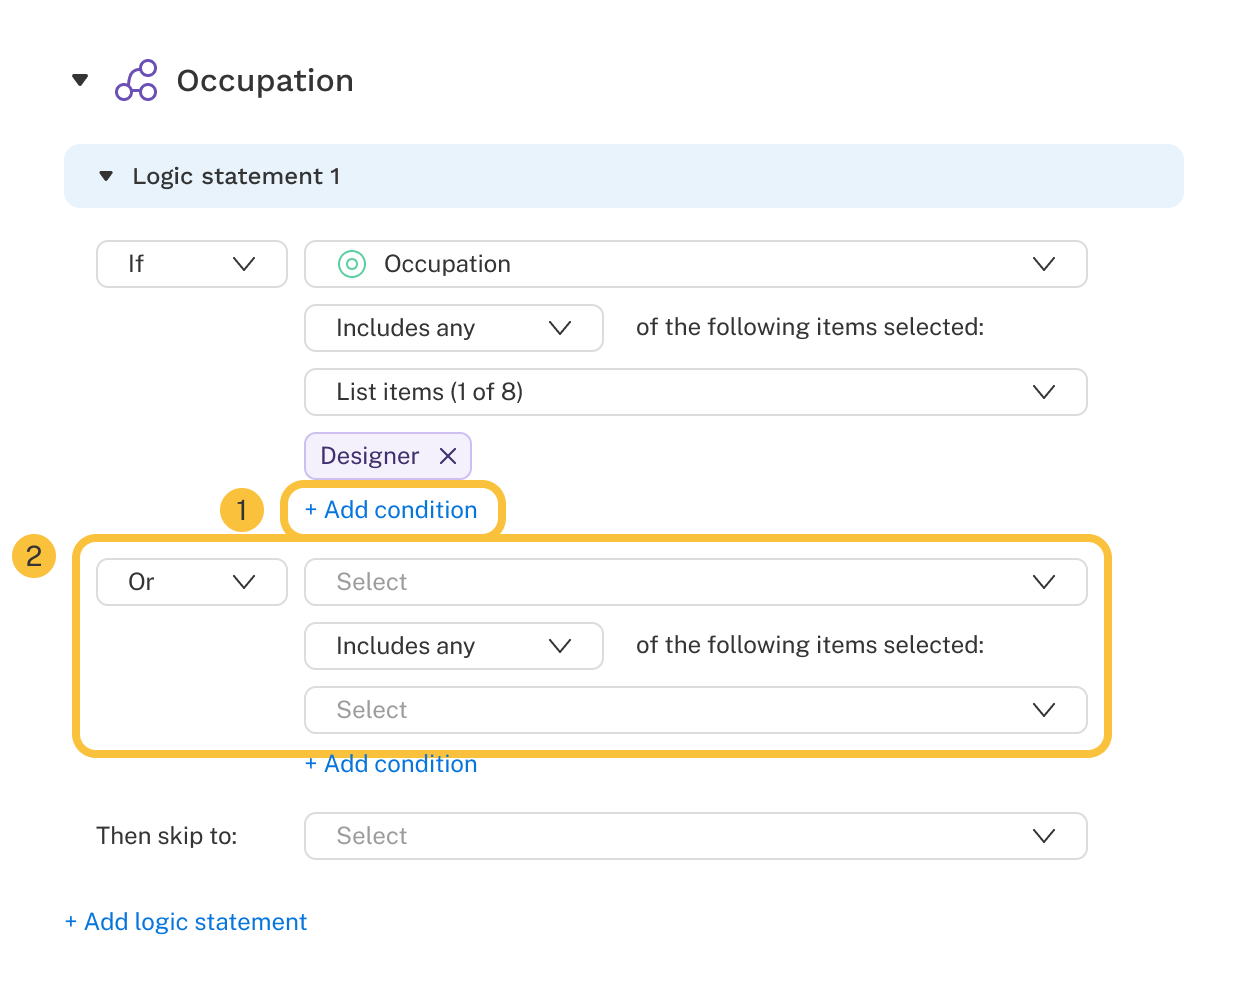 How to automate in a survey a number of answers for option 1 and another  number of answers for option 2? (it also contains multiple answers to be  checked) - Studio - UiPath Community Forum